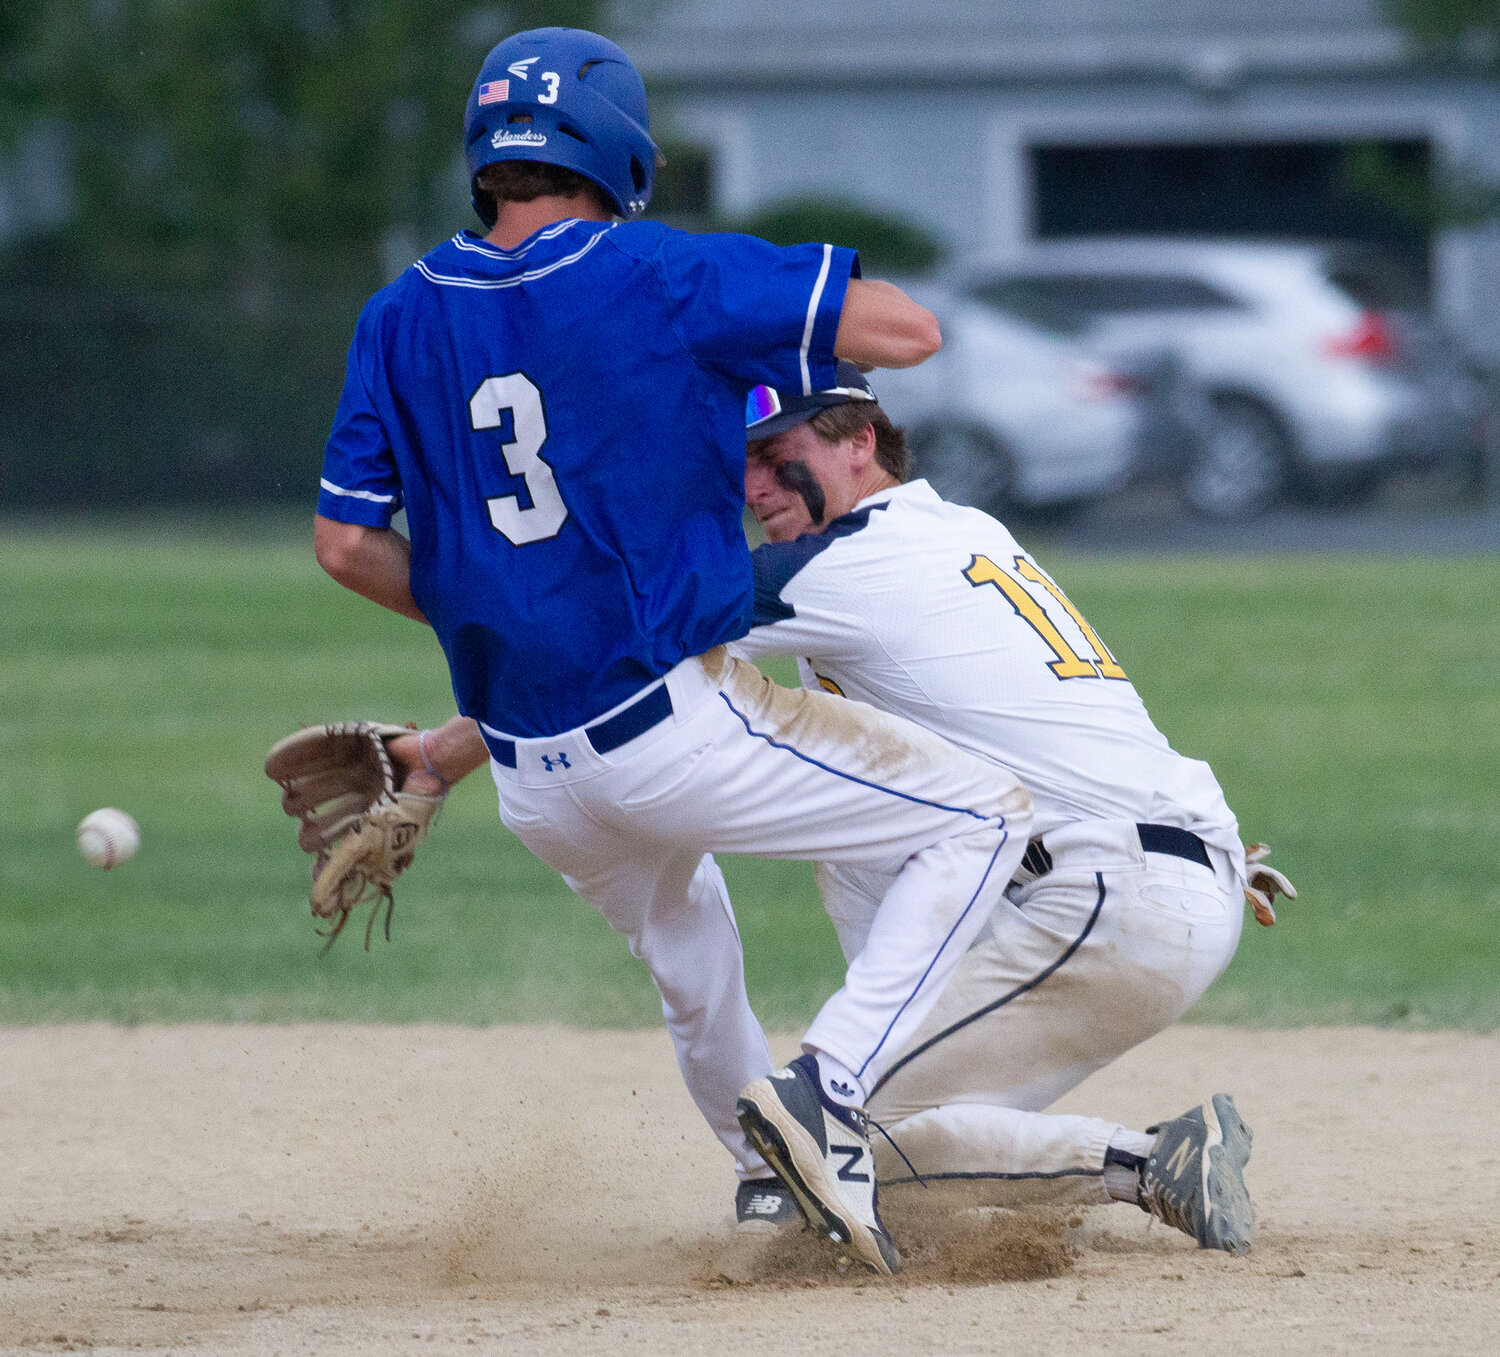 Second baseman Trevor Snow stands his ground during a Middletown steal of second base during Friday’s game.